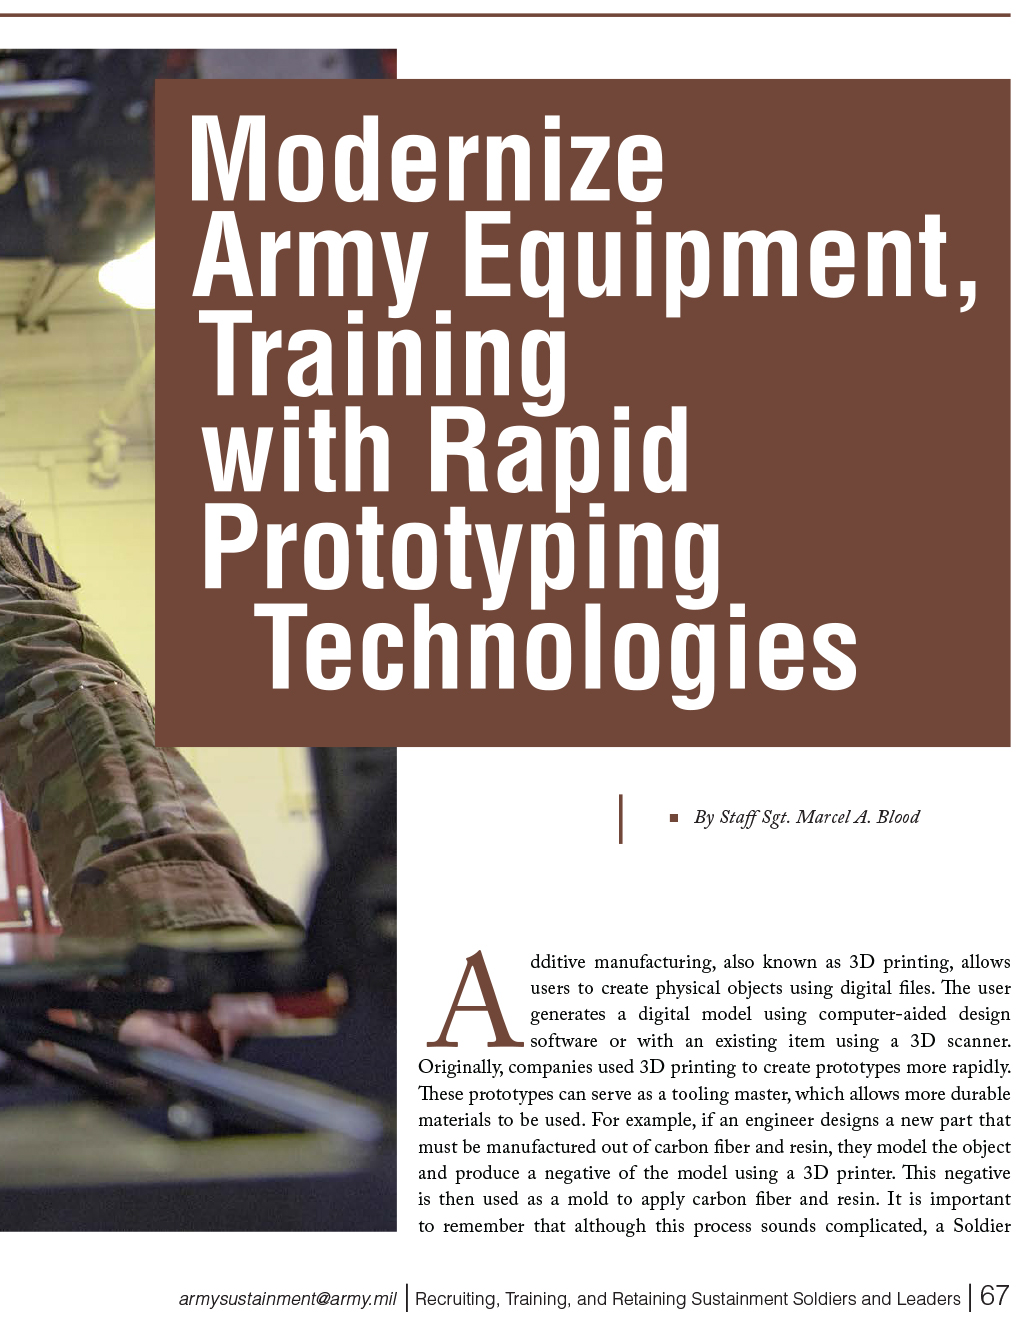 Modernize Army Equipment, Training with Rapid Prototyping Technologies